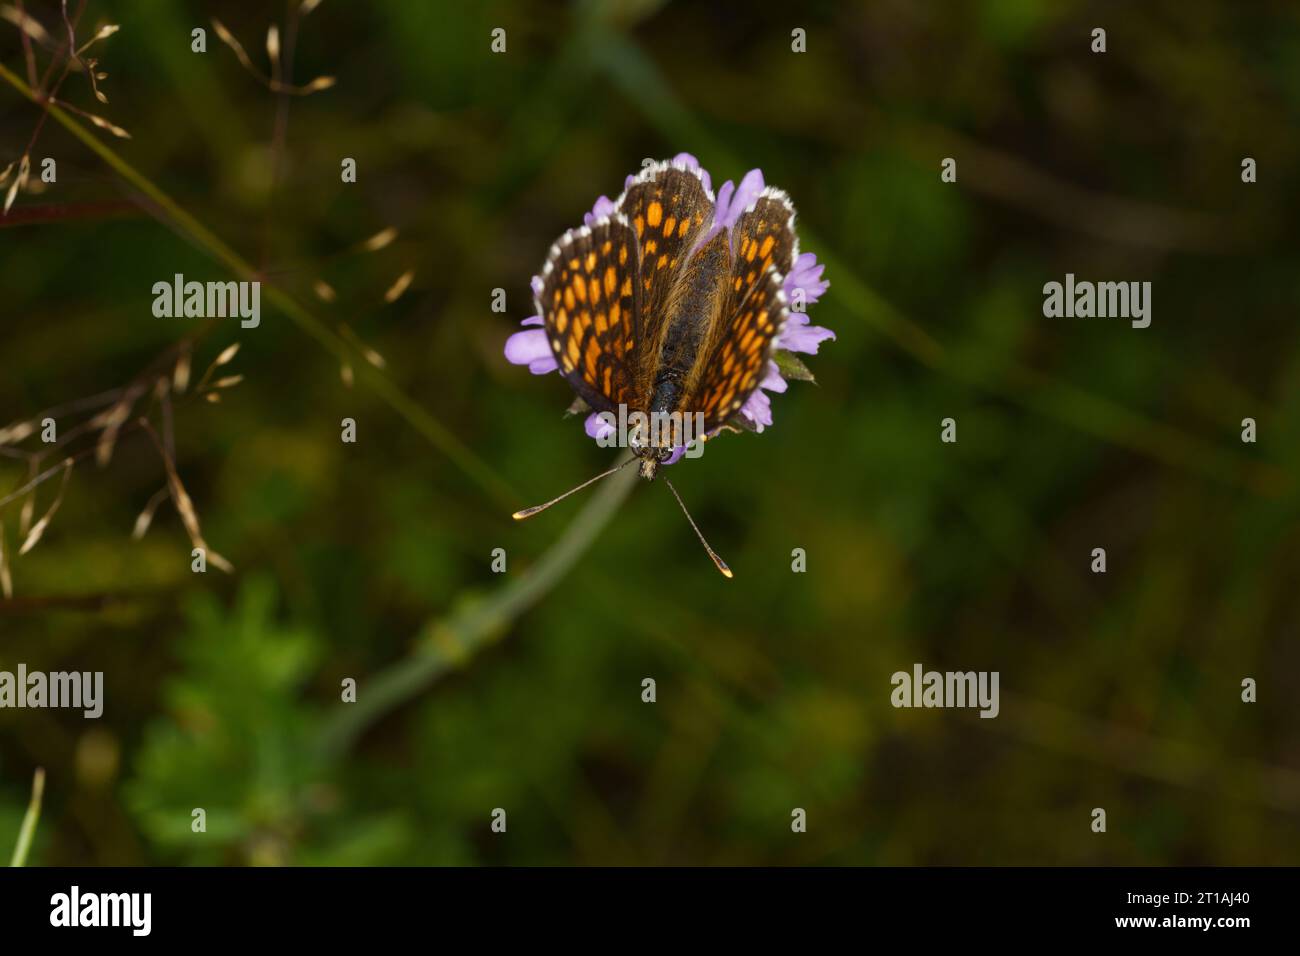 Melitaea athalia Family Nymphalidae Genus Mellicta Heath fritillary butterfly wild nature insect photography, picture, wallpaper Stock Photo